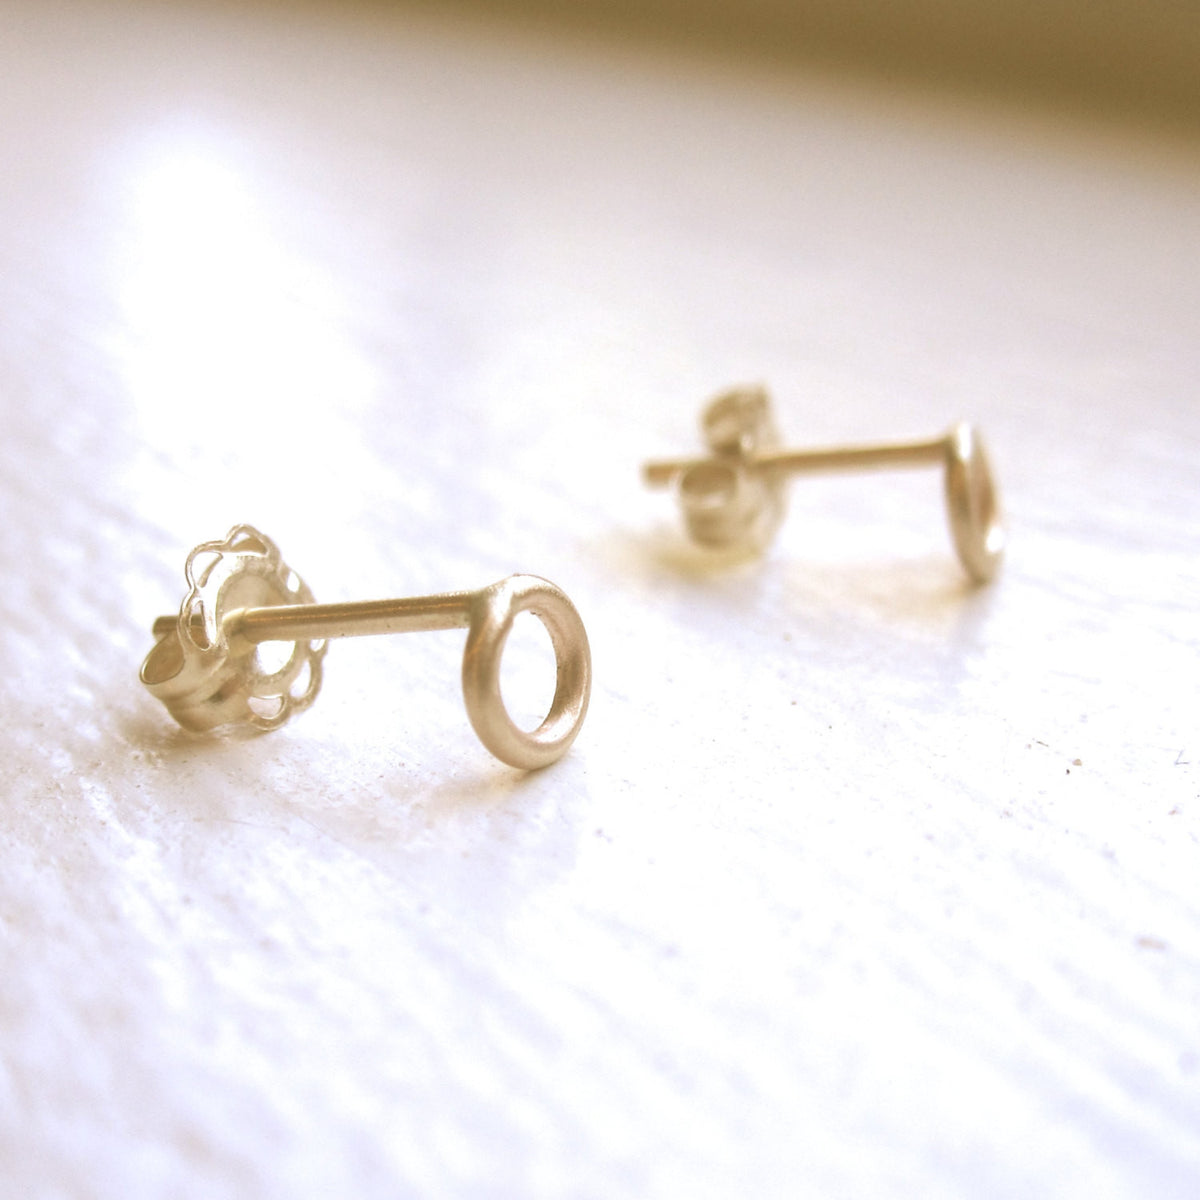 Delicate And Distinctive Hand-Made Open Circle Stud Earrings - 0126 - Virginia Wynne Designs